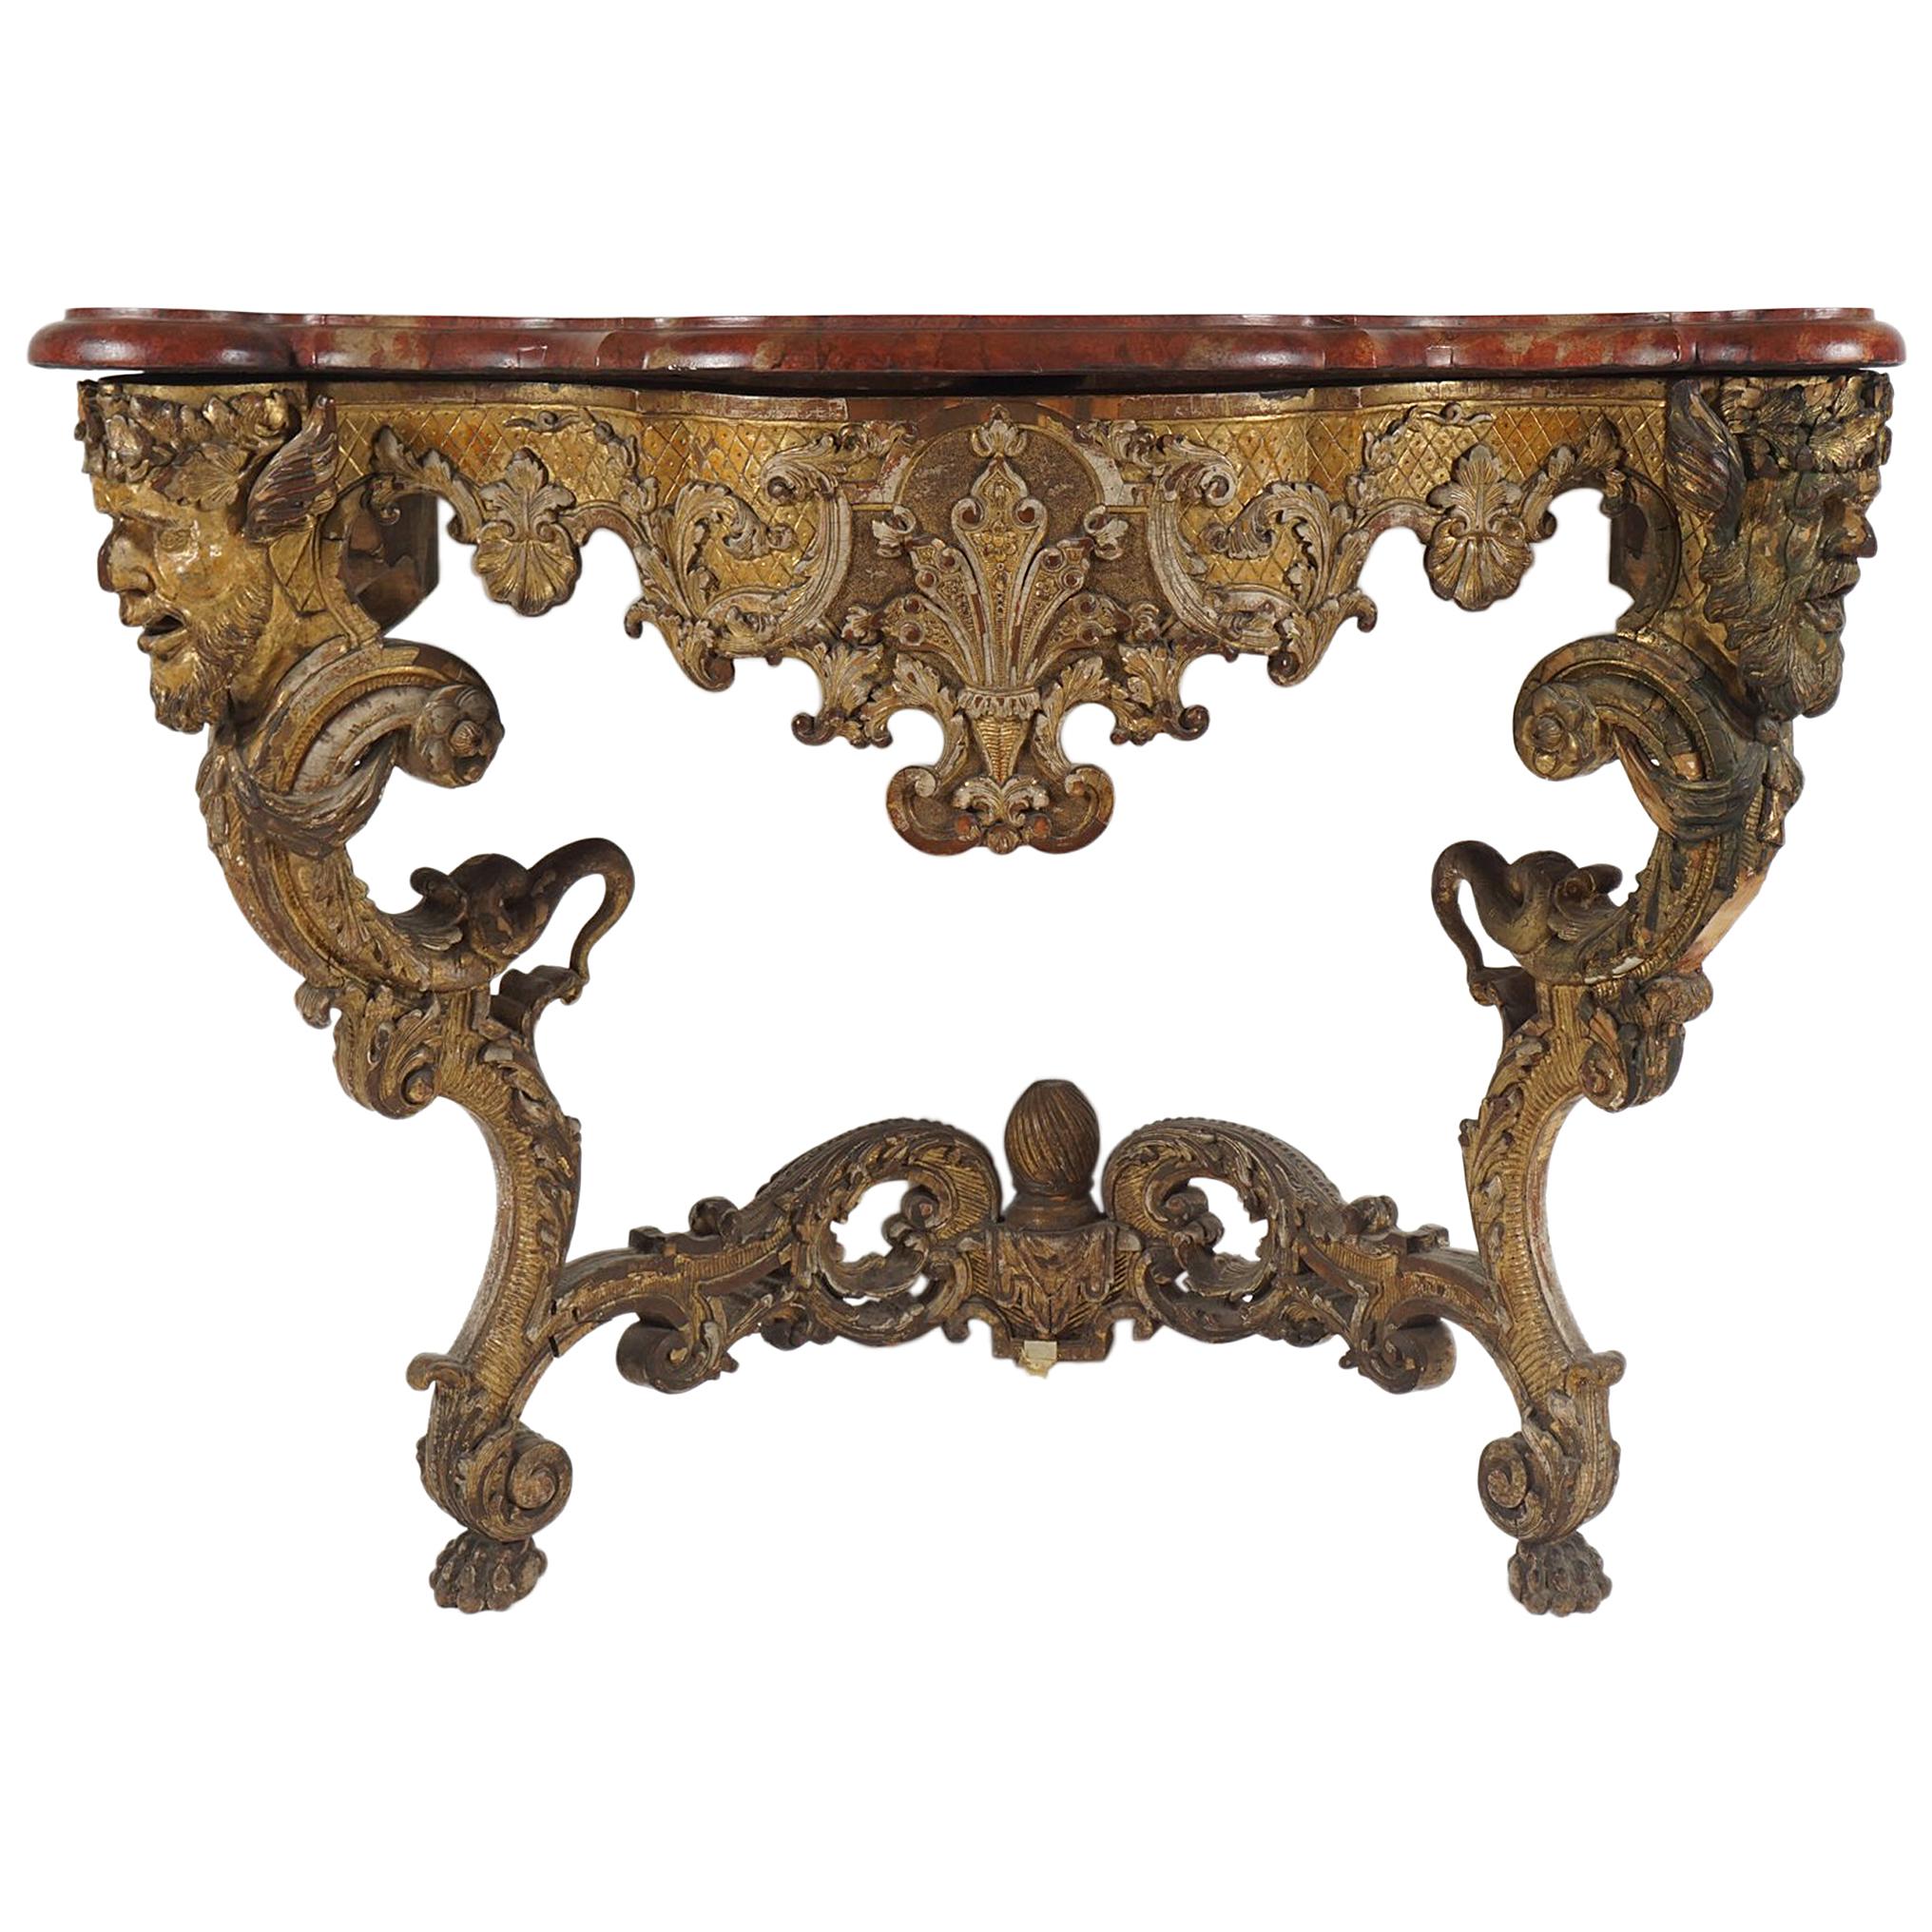 Baroque Giltwood Console